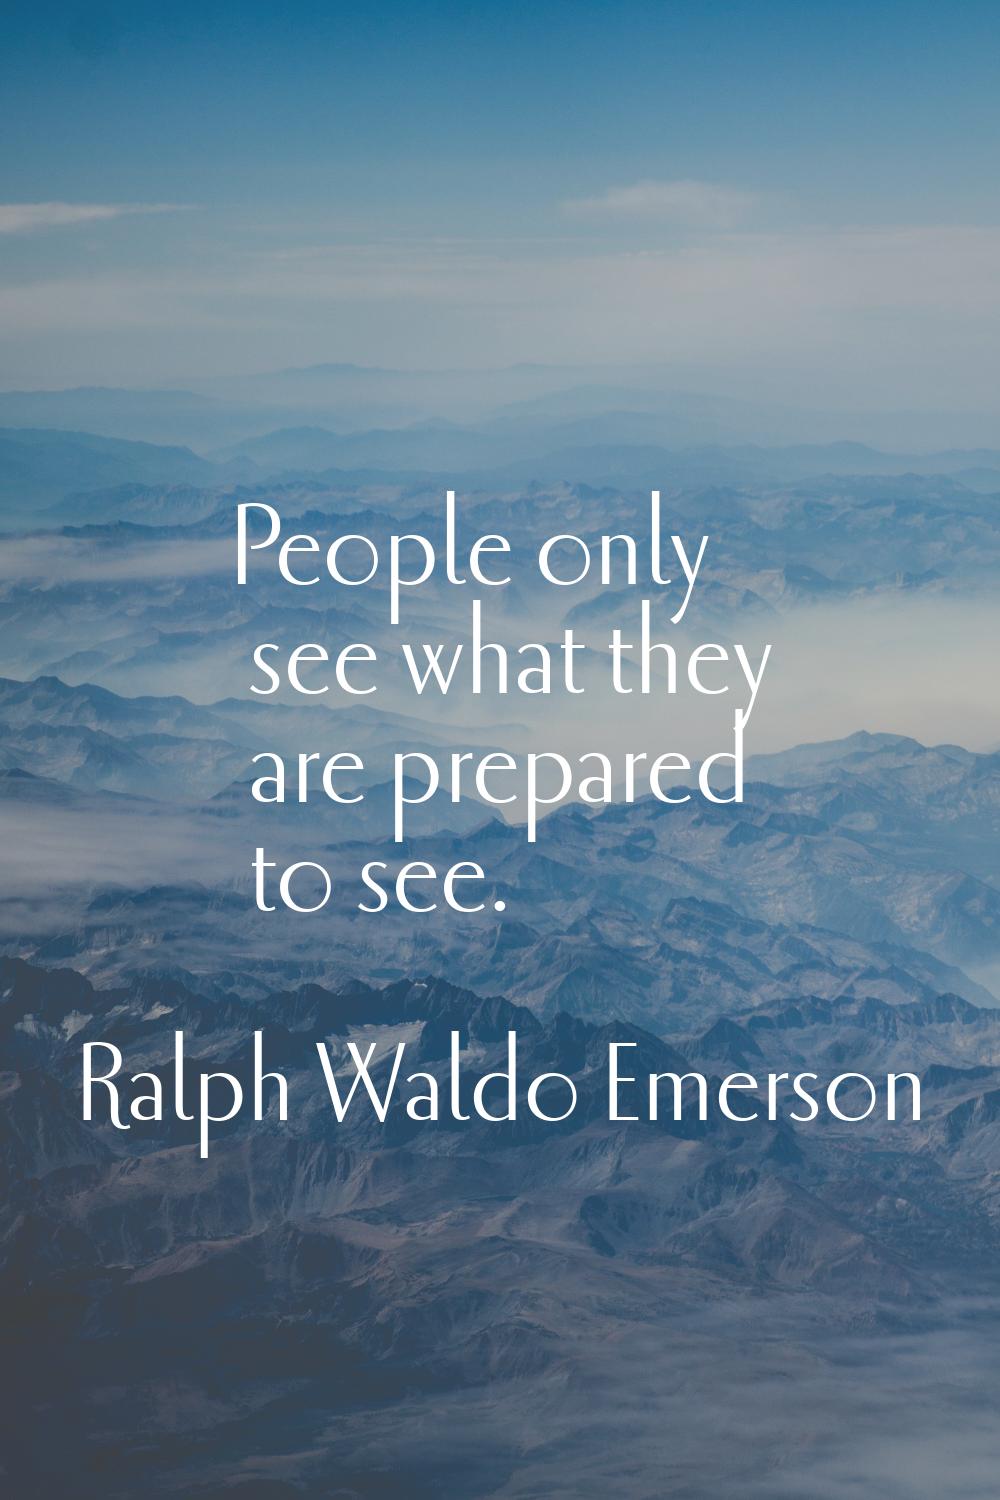 People only see what they are prepared to see.